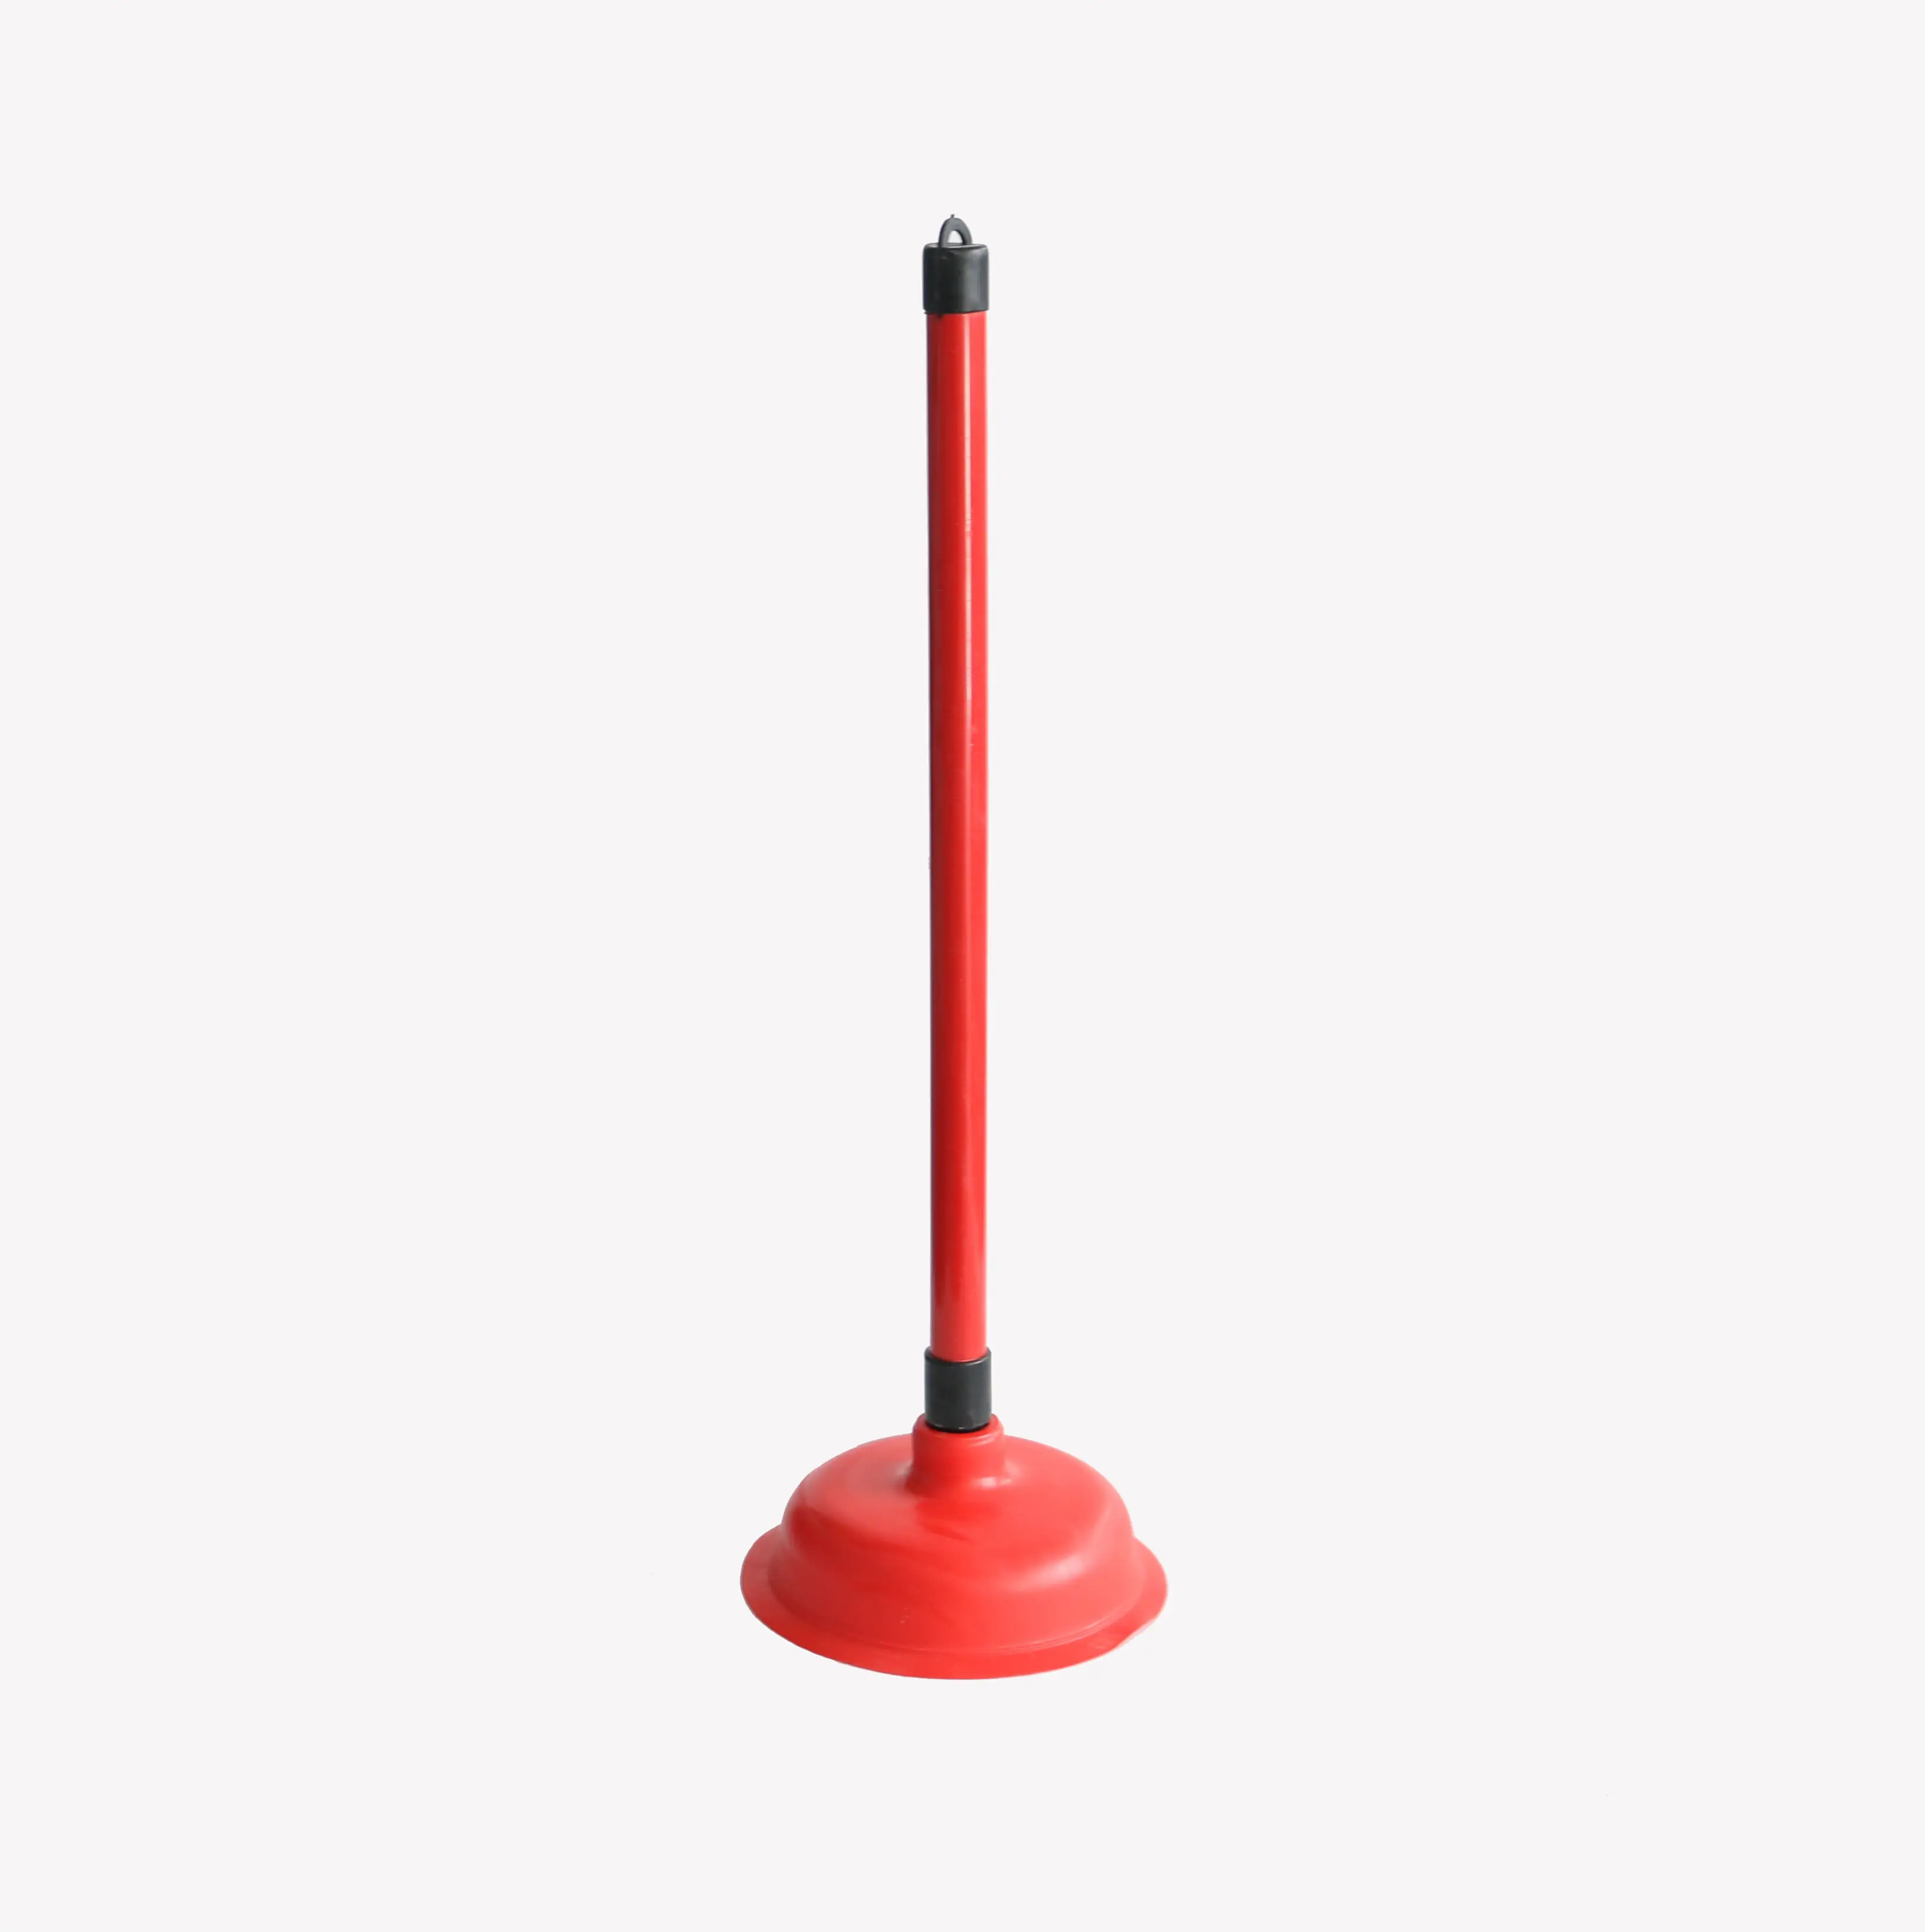 ITEM NO.2221 13.5CM red good suction PVC Force Cup PVC Toilet Plunger with a Long Plastic Handle